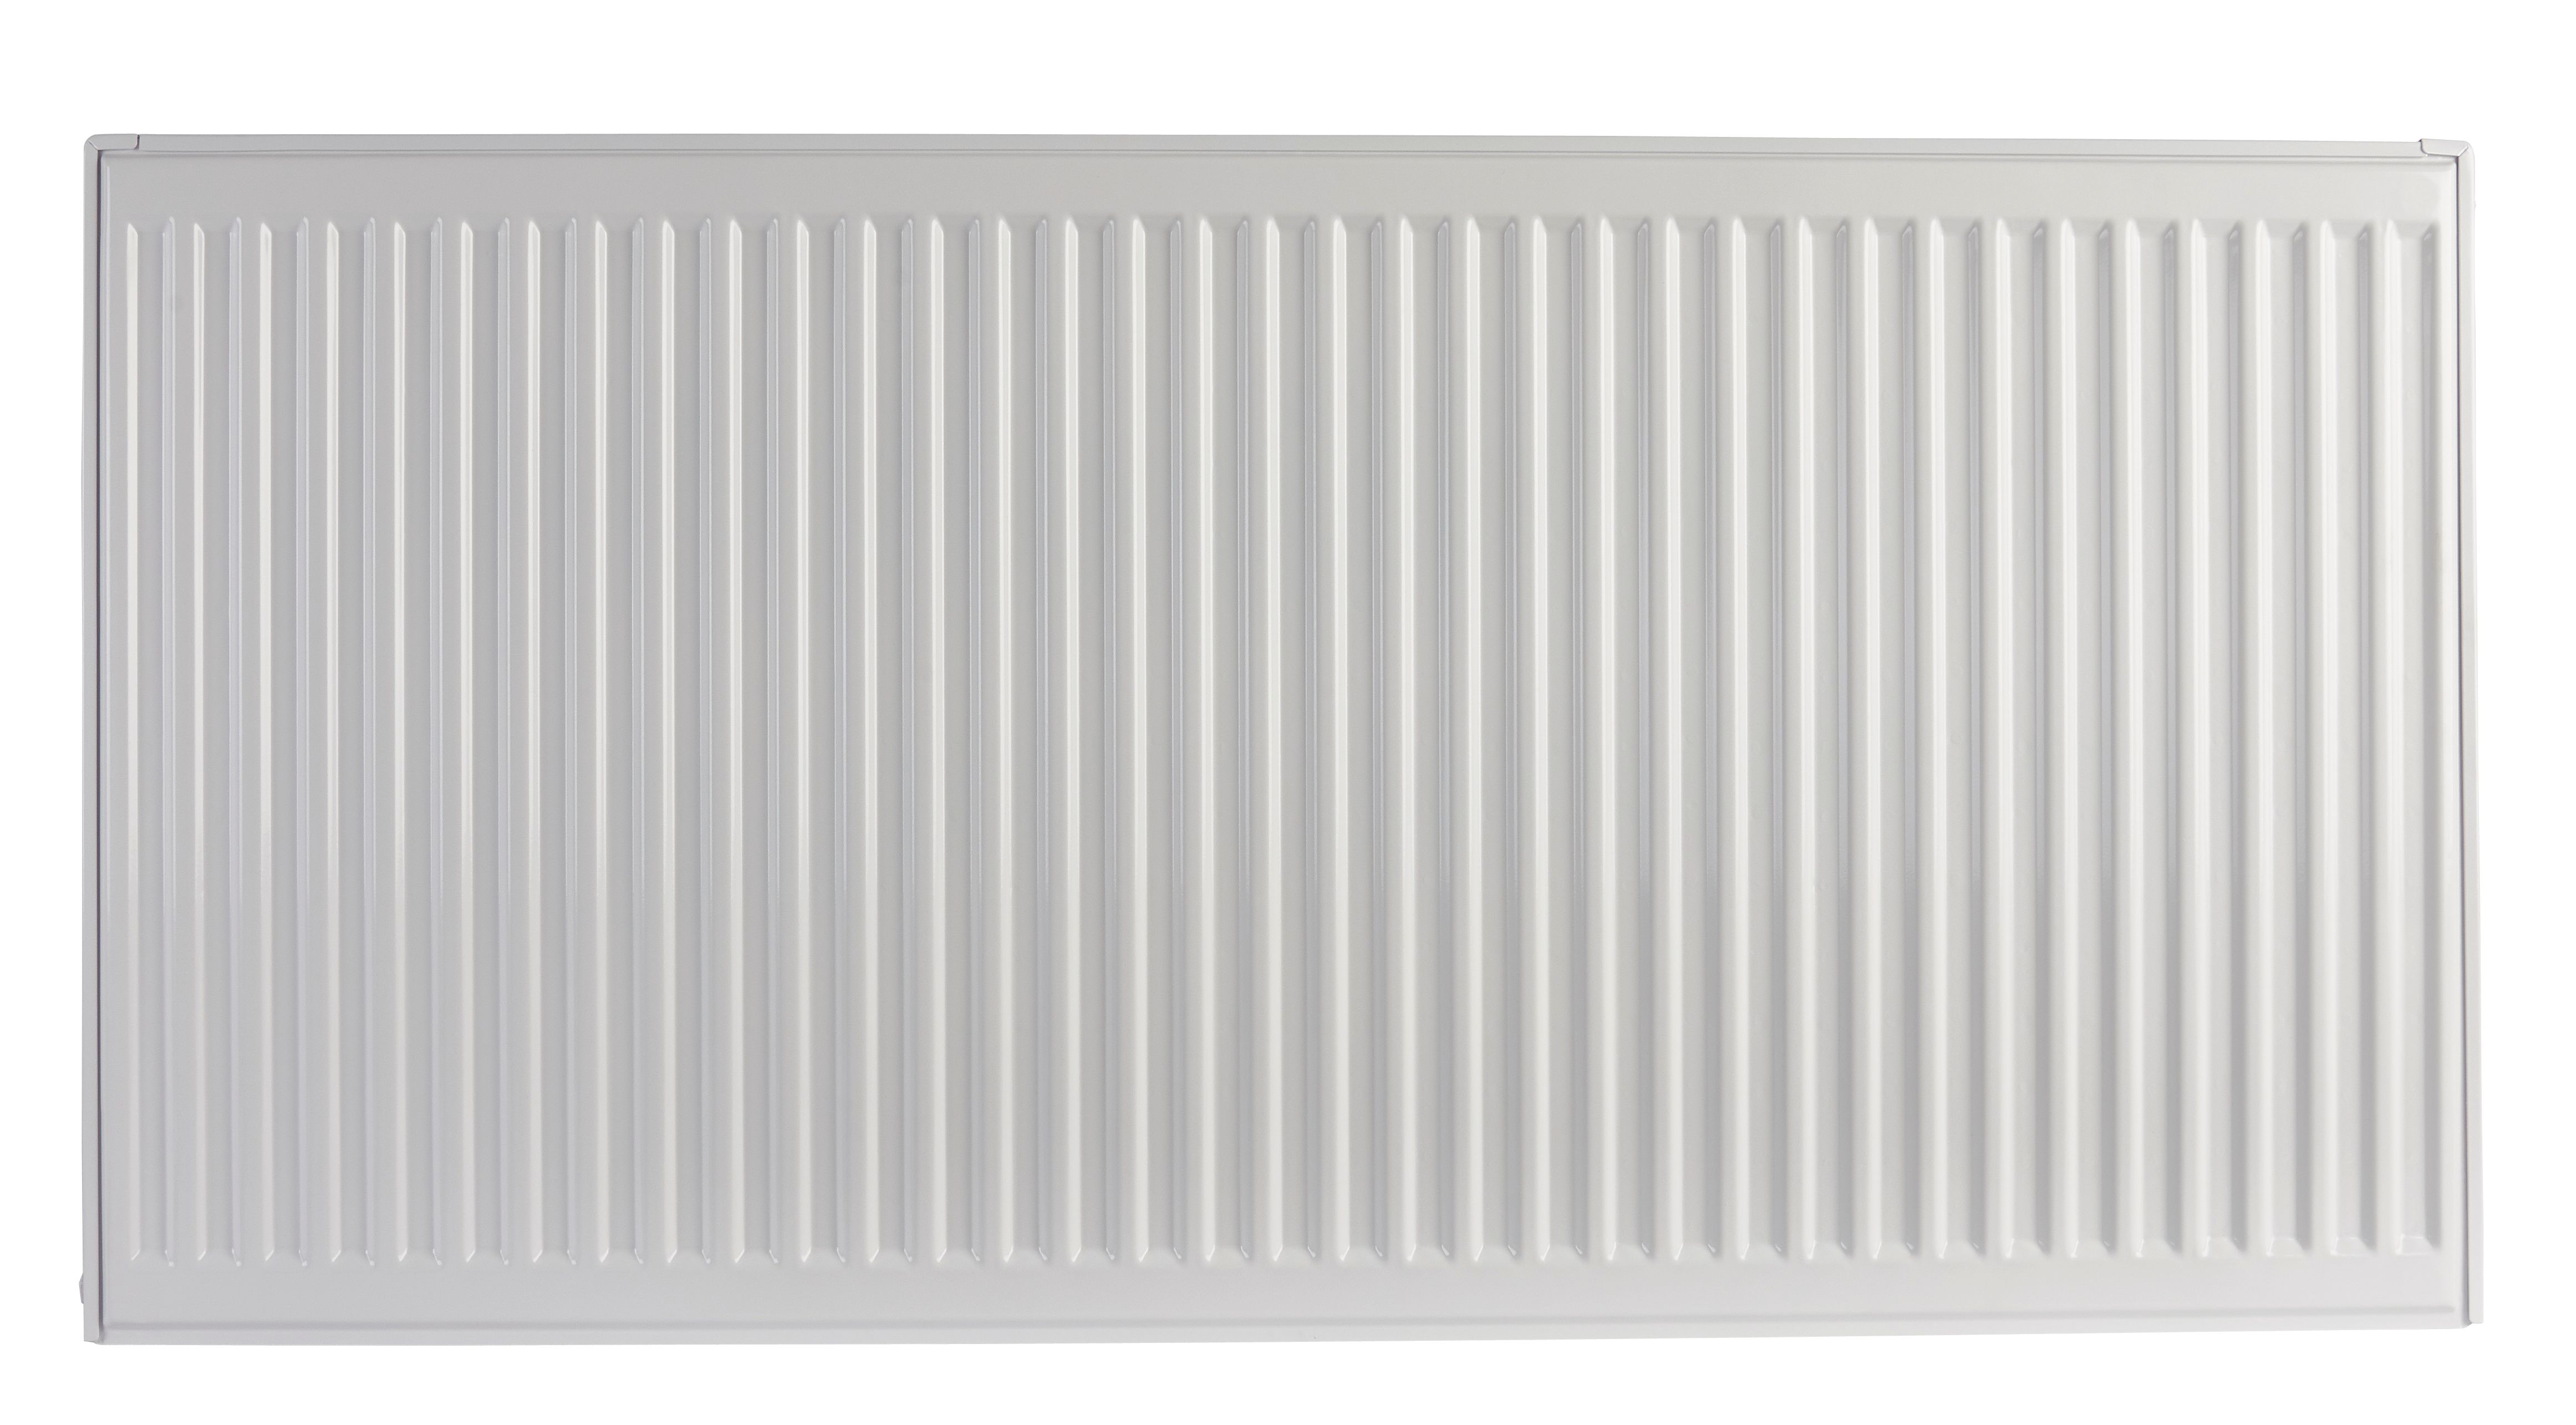 Image of Homeline by Stelrad 500 x 1400mm Type 21 Double Panel Plus Single Convector Radiator